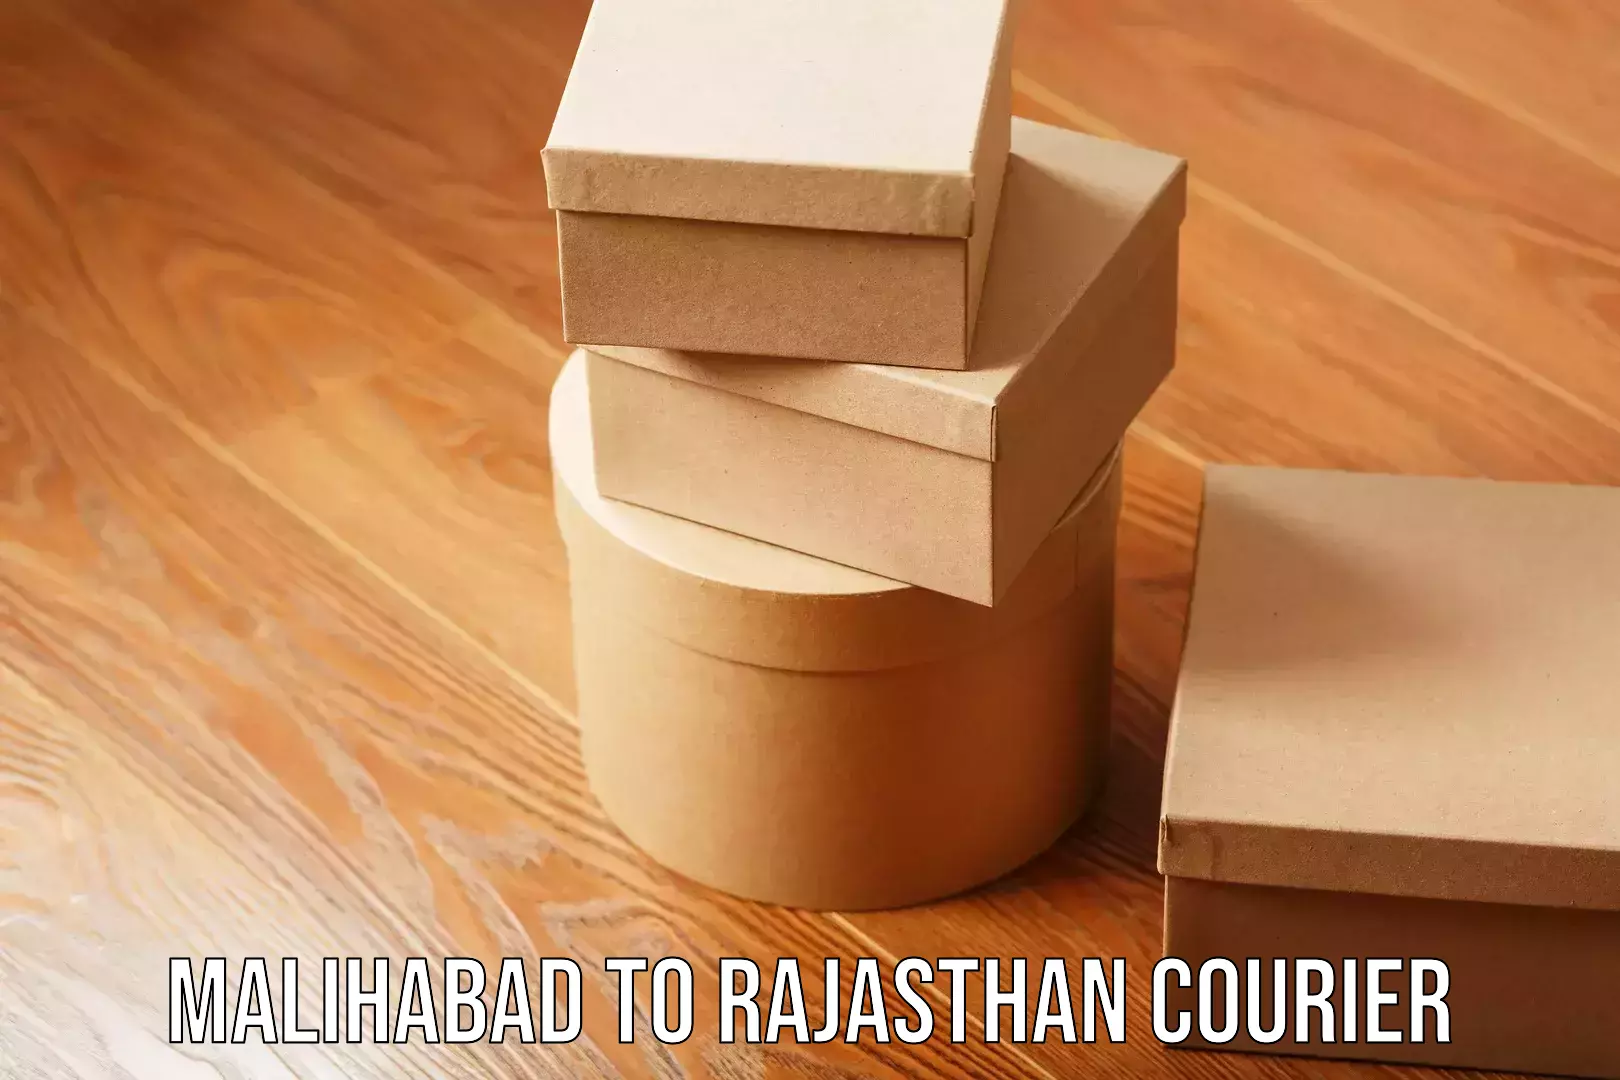 Furniture relocation experts Malihabad to Rajasthan